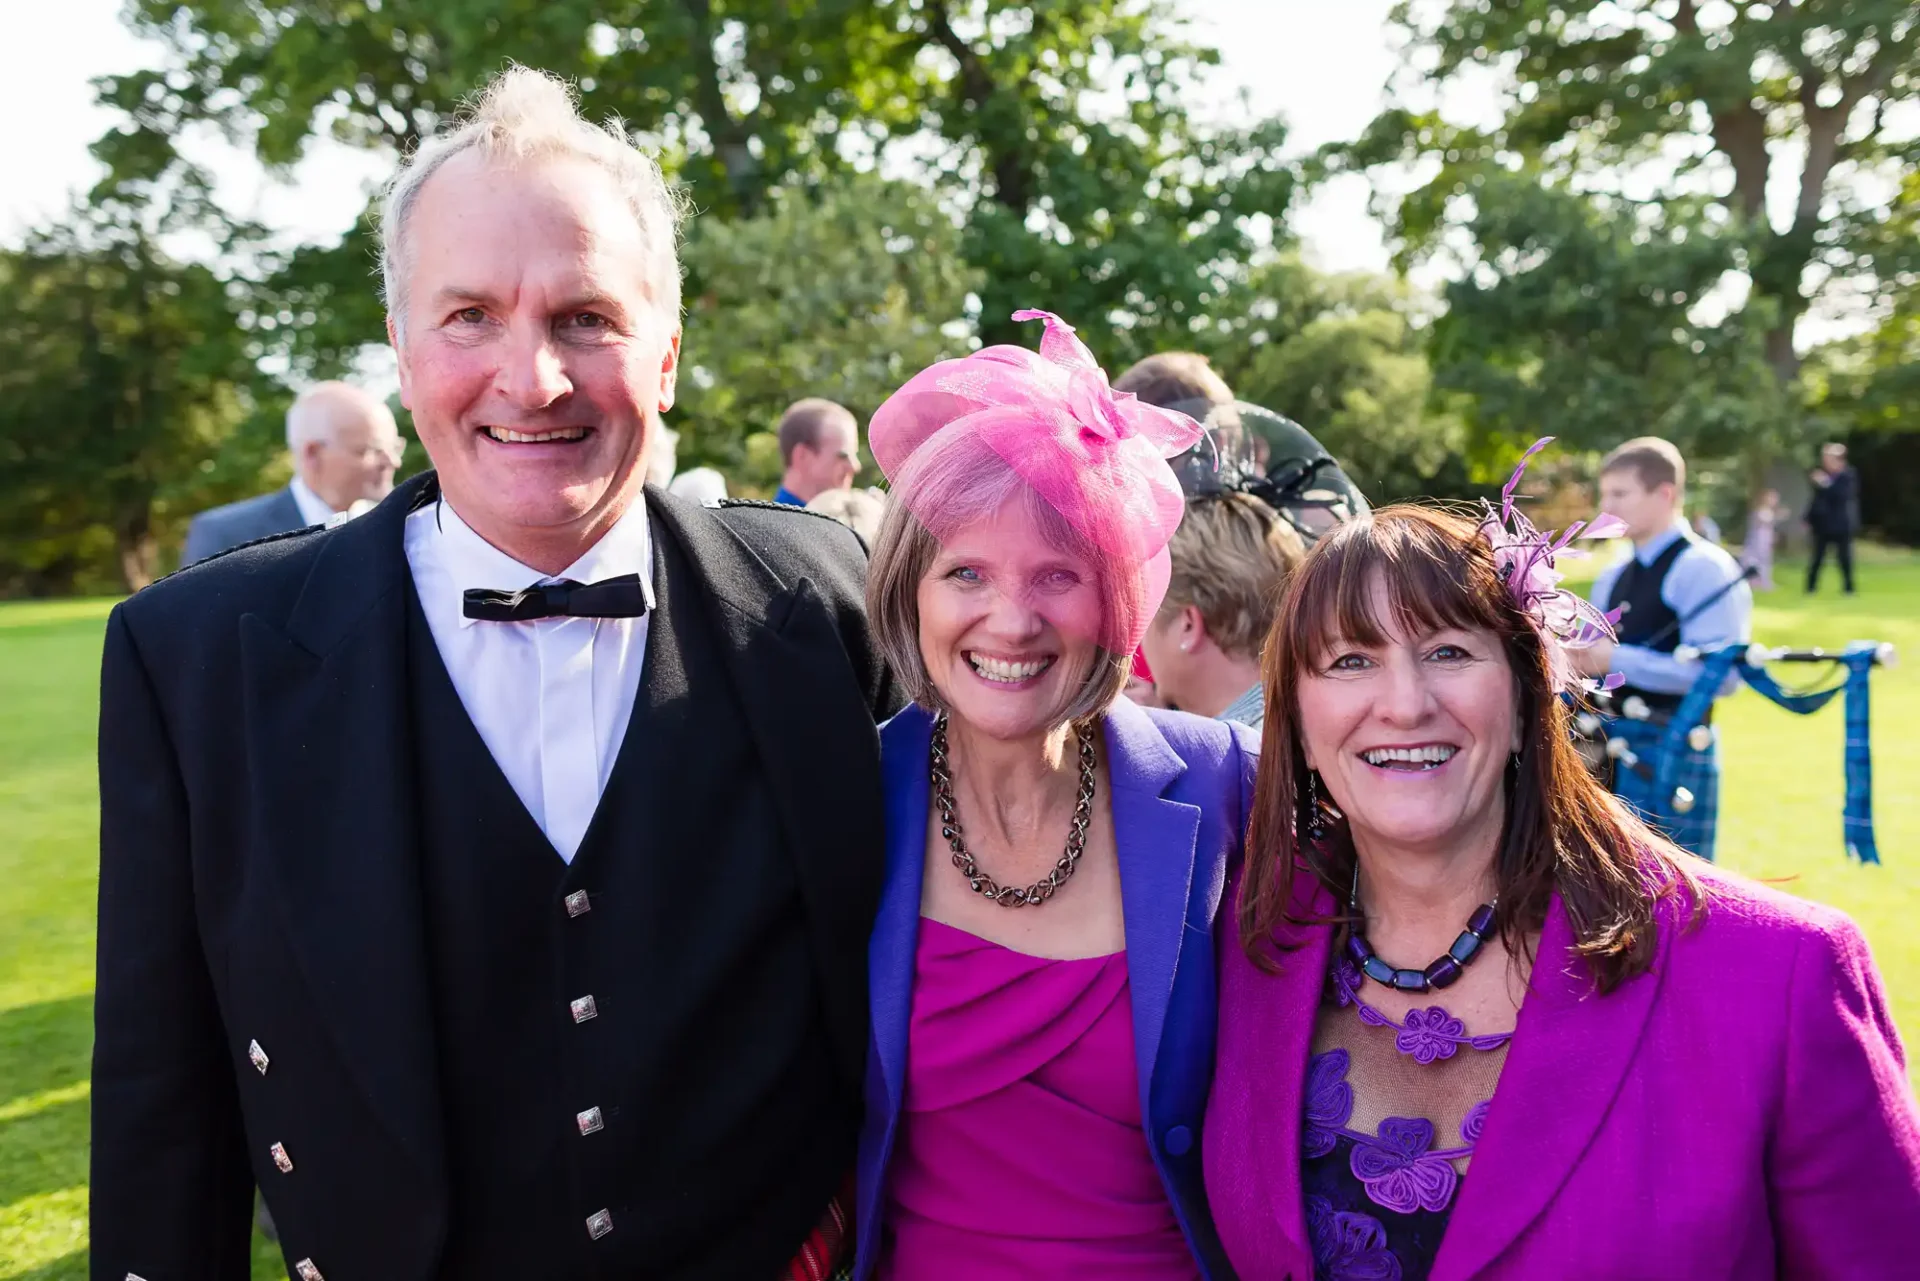 Three smiling adults at an outdoor event; a man in a tuxedo flanked by two women in vibrant purple outfits, one wearing a pink hat.